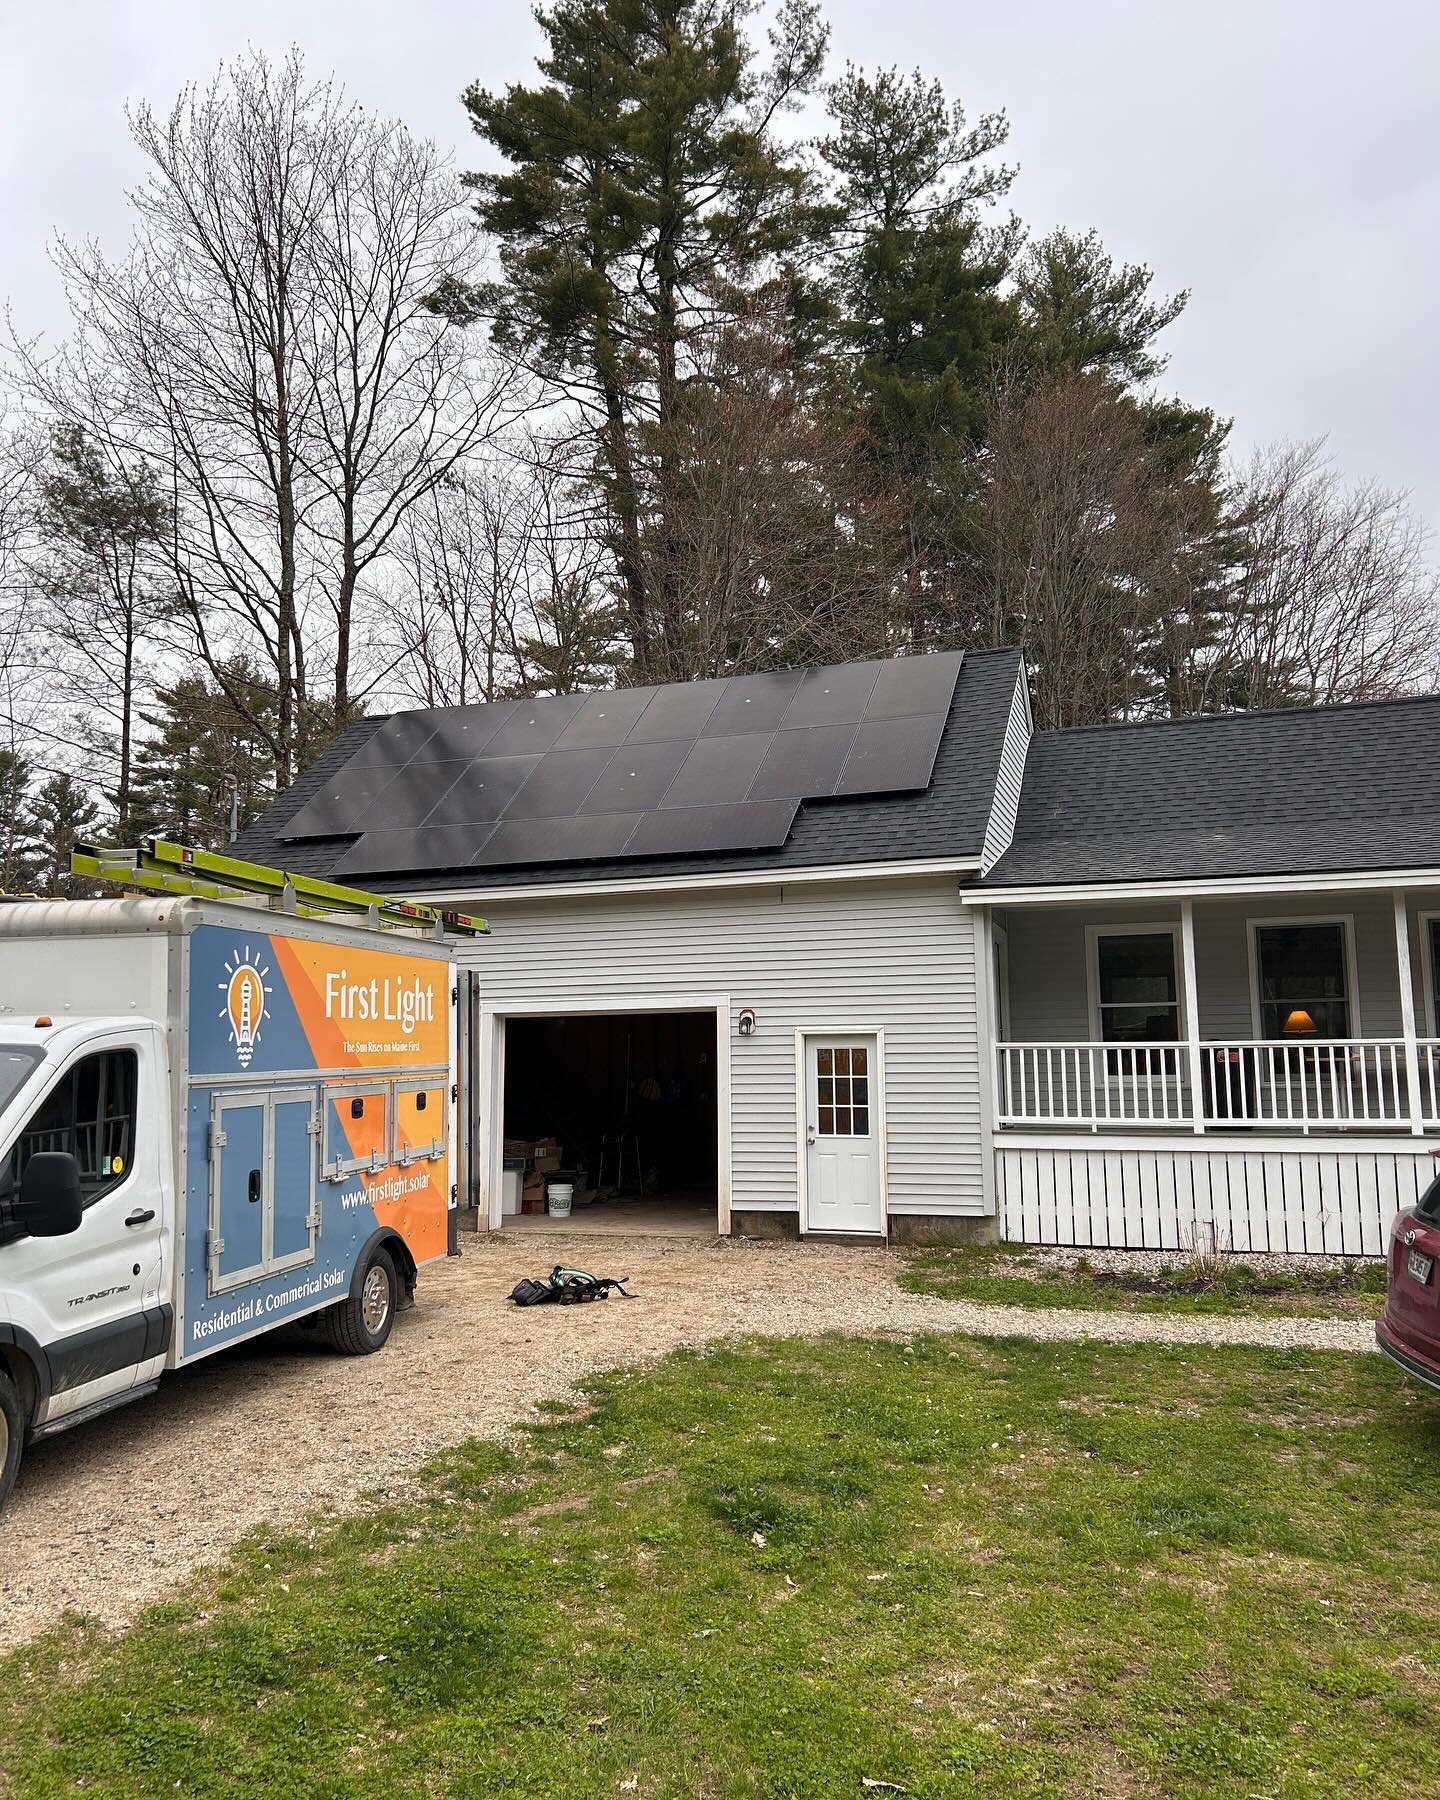 Solar panels operate most efficiently when the temperature is between 60 and 80 degrees Fahrenheit. Making the spring season perfect for solar installation and power generation. #thesunrisesonmainefirst